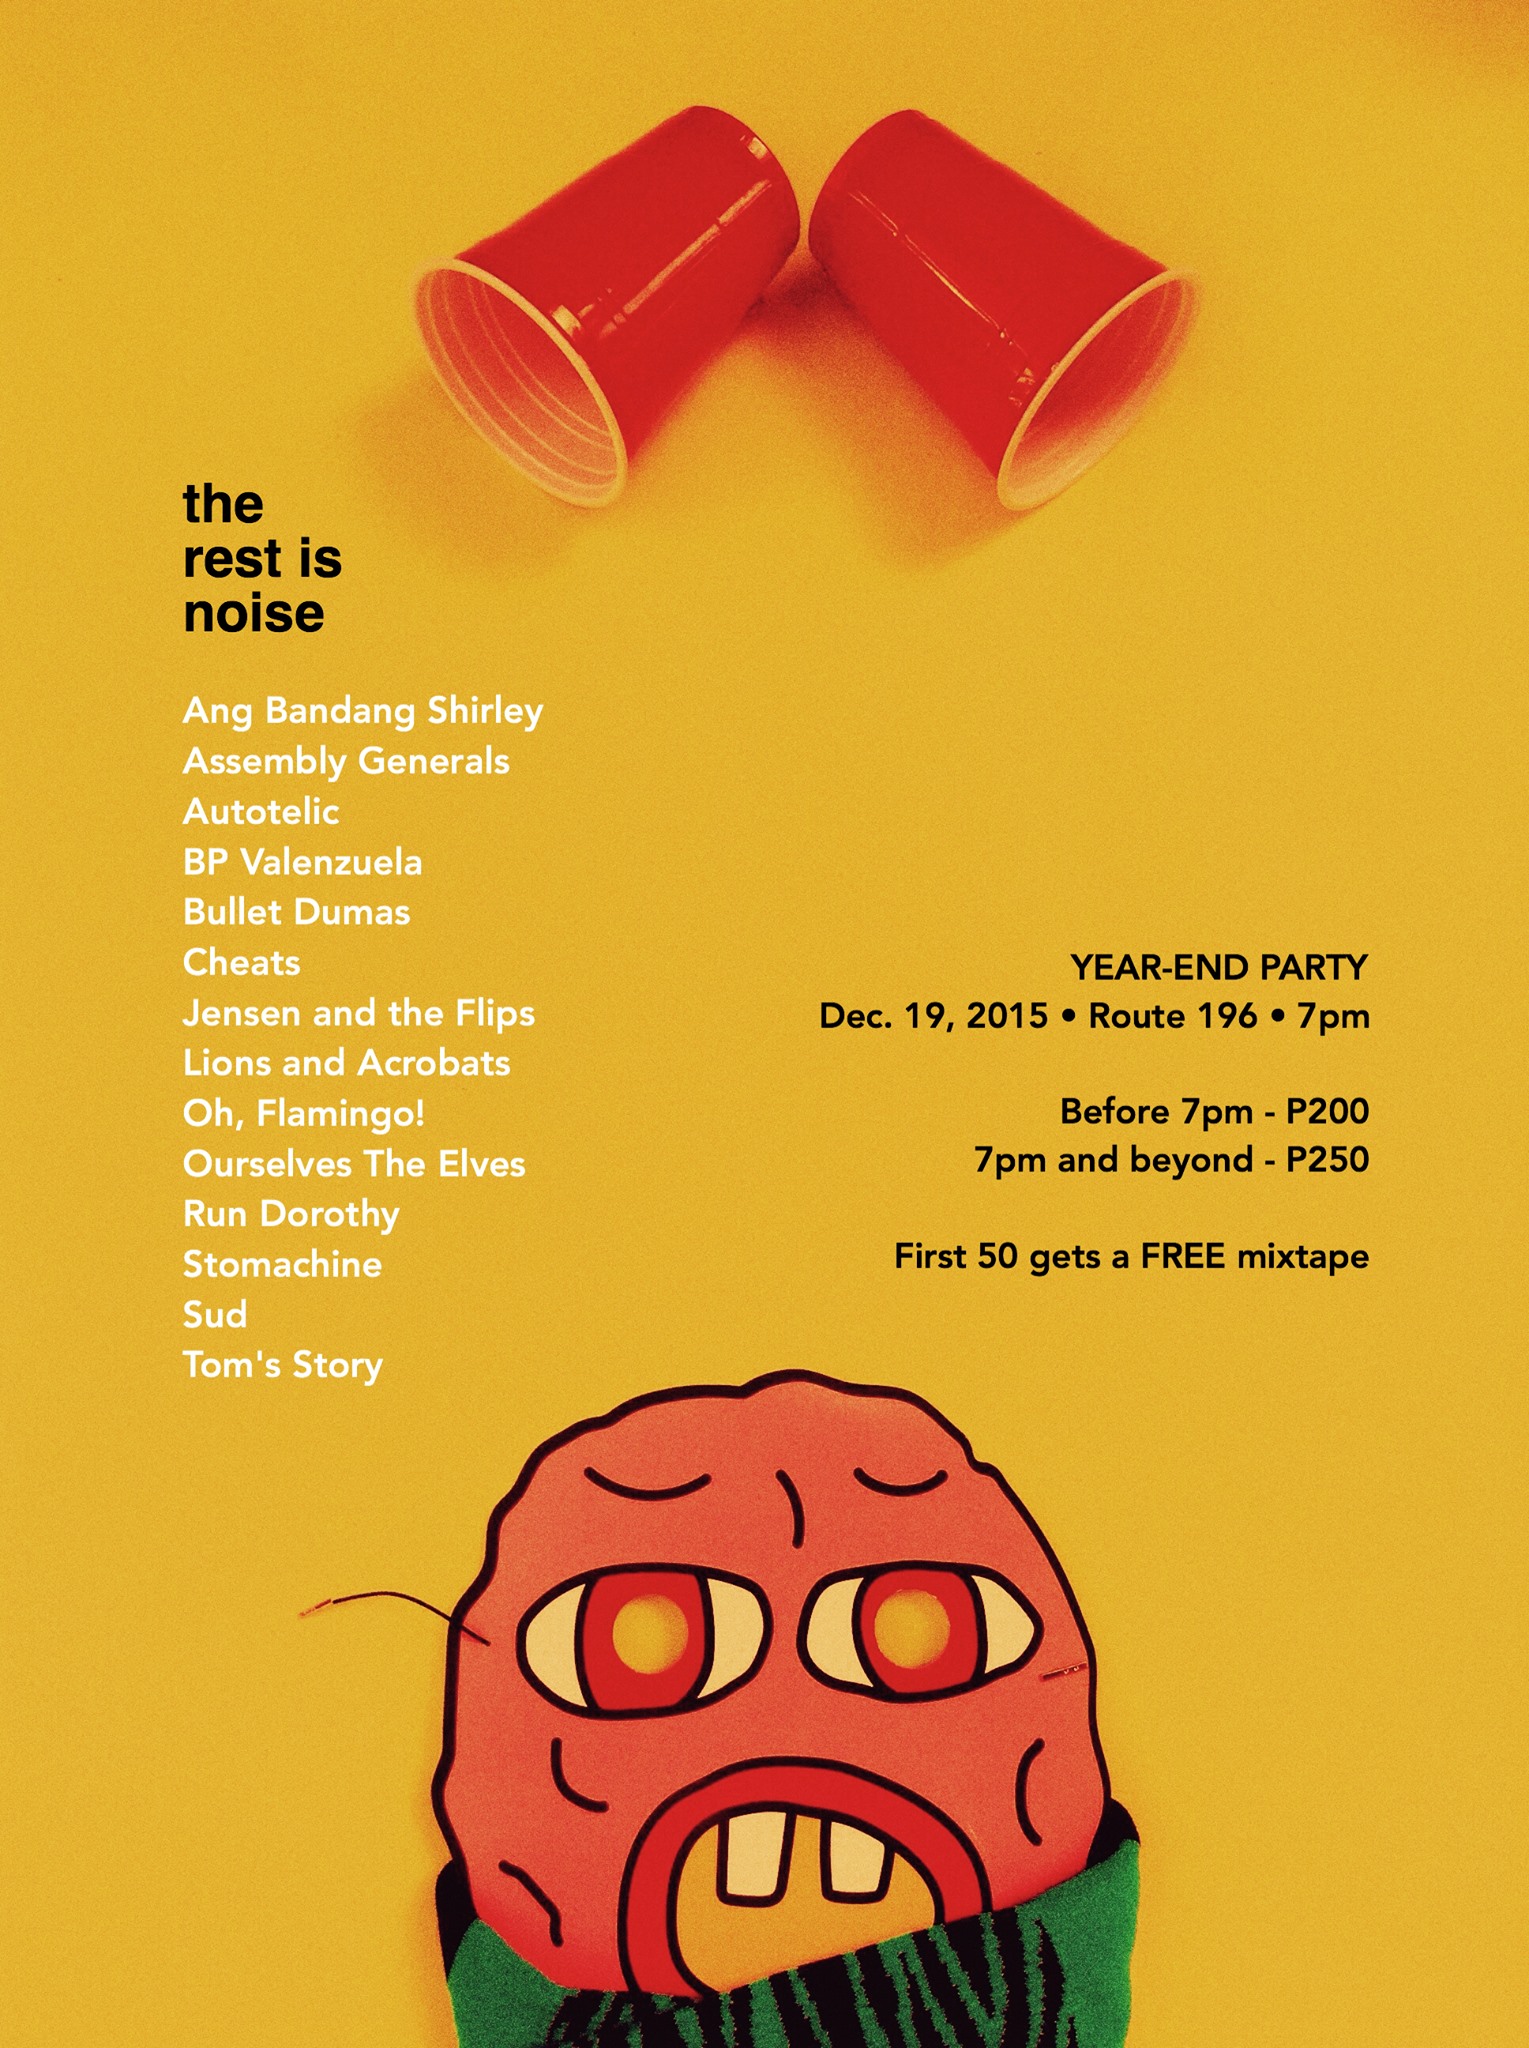 The Rest Is Noise: Year-Ender Gig clock Saturday, December 19 at 7:00pm pin Show Map Route 196 Bar 196-A Katipunan Avenue Extension, Blue Ridge A, Quezon City, Philippines 14 Bands. One Night. A Year-Ender Party that will knock your socks off. Featuring: Ang Bandang Shirley, Assembly Generals, Autotelic, bp valenzuela, Bullet Dumas, Cheats, Jensen and The Flips, Lions and Acrobats, Oh, Flamingo, Ourselves the Elves, Run Dorothy, Stomachine, Sud, and Tom's Story Door charge: Before 7pm - P200 + 1 free drink 7pm and beyond - P250 + 1 free drink FREE copies of The Rest Is Noise: Year-End Mixtape to the FIRST 50 attendees!